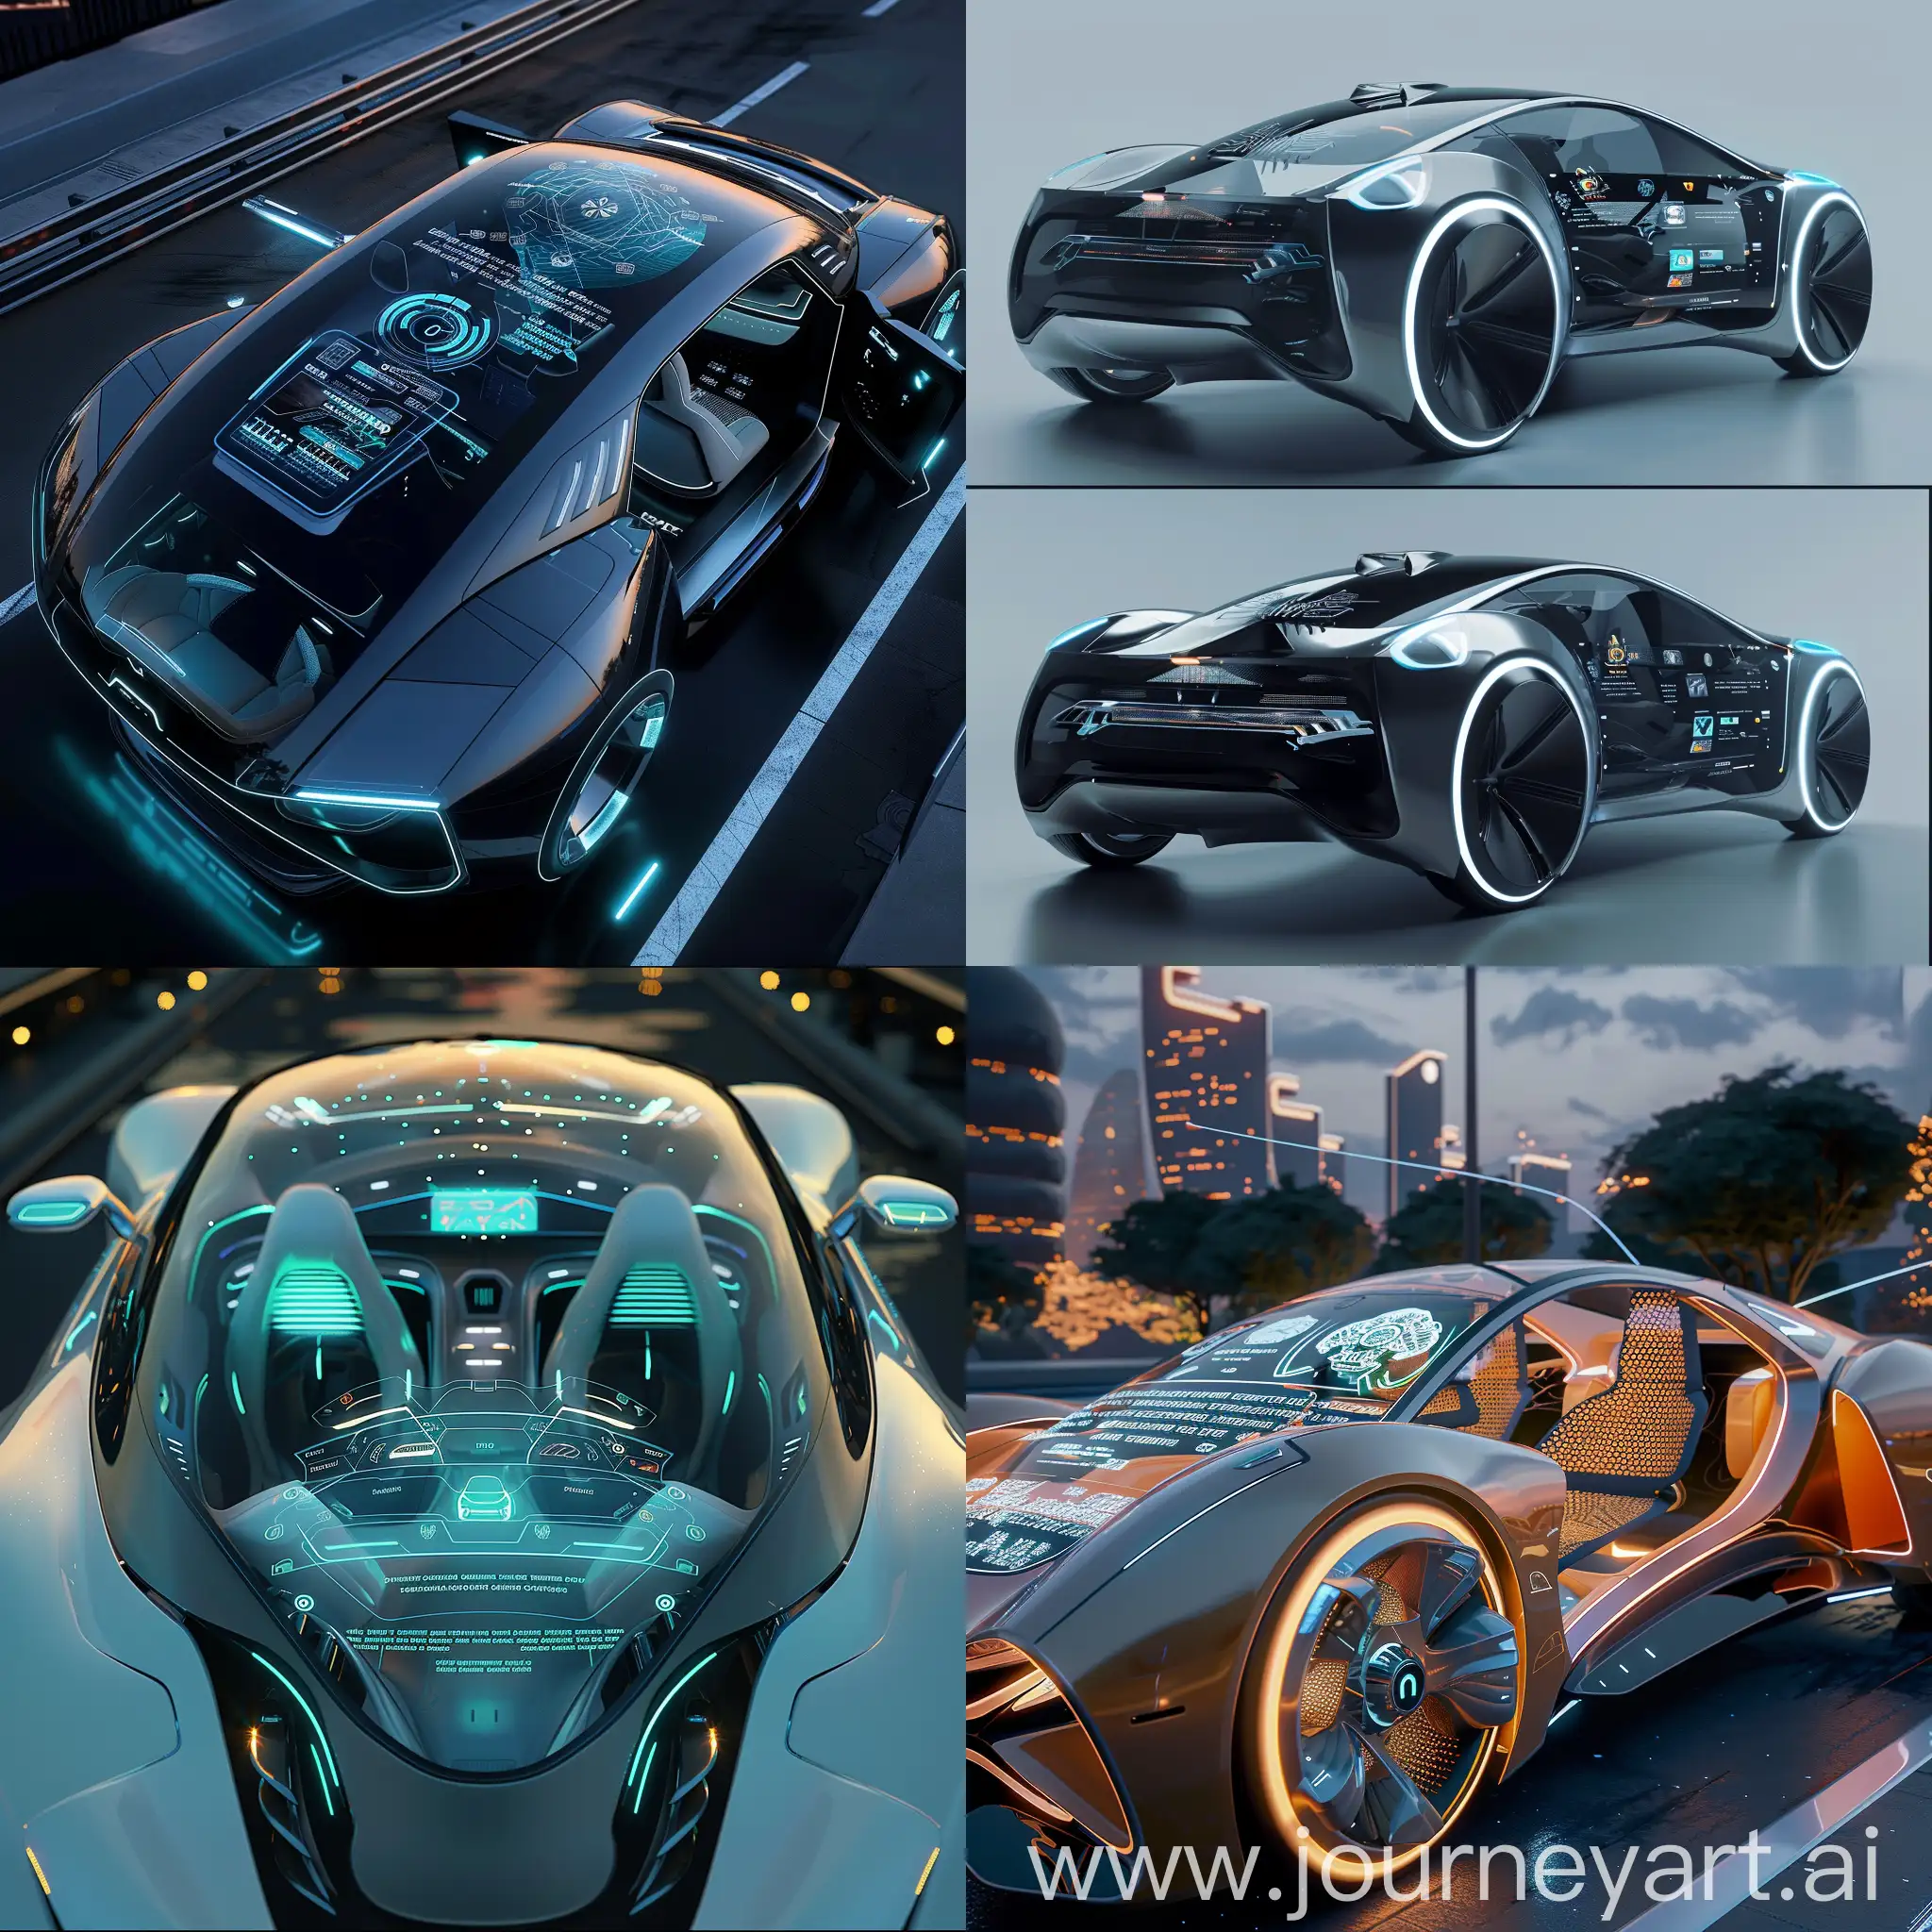 High-tech futuristic car, Augmented Reality Windshield, Holographic Dashboard, Biometric Driver Identification, Intelligent Adaptive Seating, AI-Powered Voice Assistant, Smart Climate Control System, Self-Healing Body Panels, Gesture-Controlled Infotainment System, Wireless Charging Stations, Advanced Safety Sensors, Dynamic LED Lighting, Aerodynamic Body Design, Smart Glass Roof, Retractable Door Handles, Interactive Light Displays, Self-Cleaning Nanotech Paint, Integrated Solar Panels, Augmented Reality Side Mirrors, Active Aero Components, Sustainable Material Construction, unreal engine 5 --stylize 1000